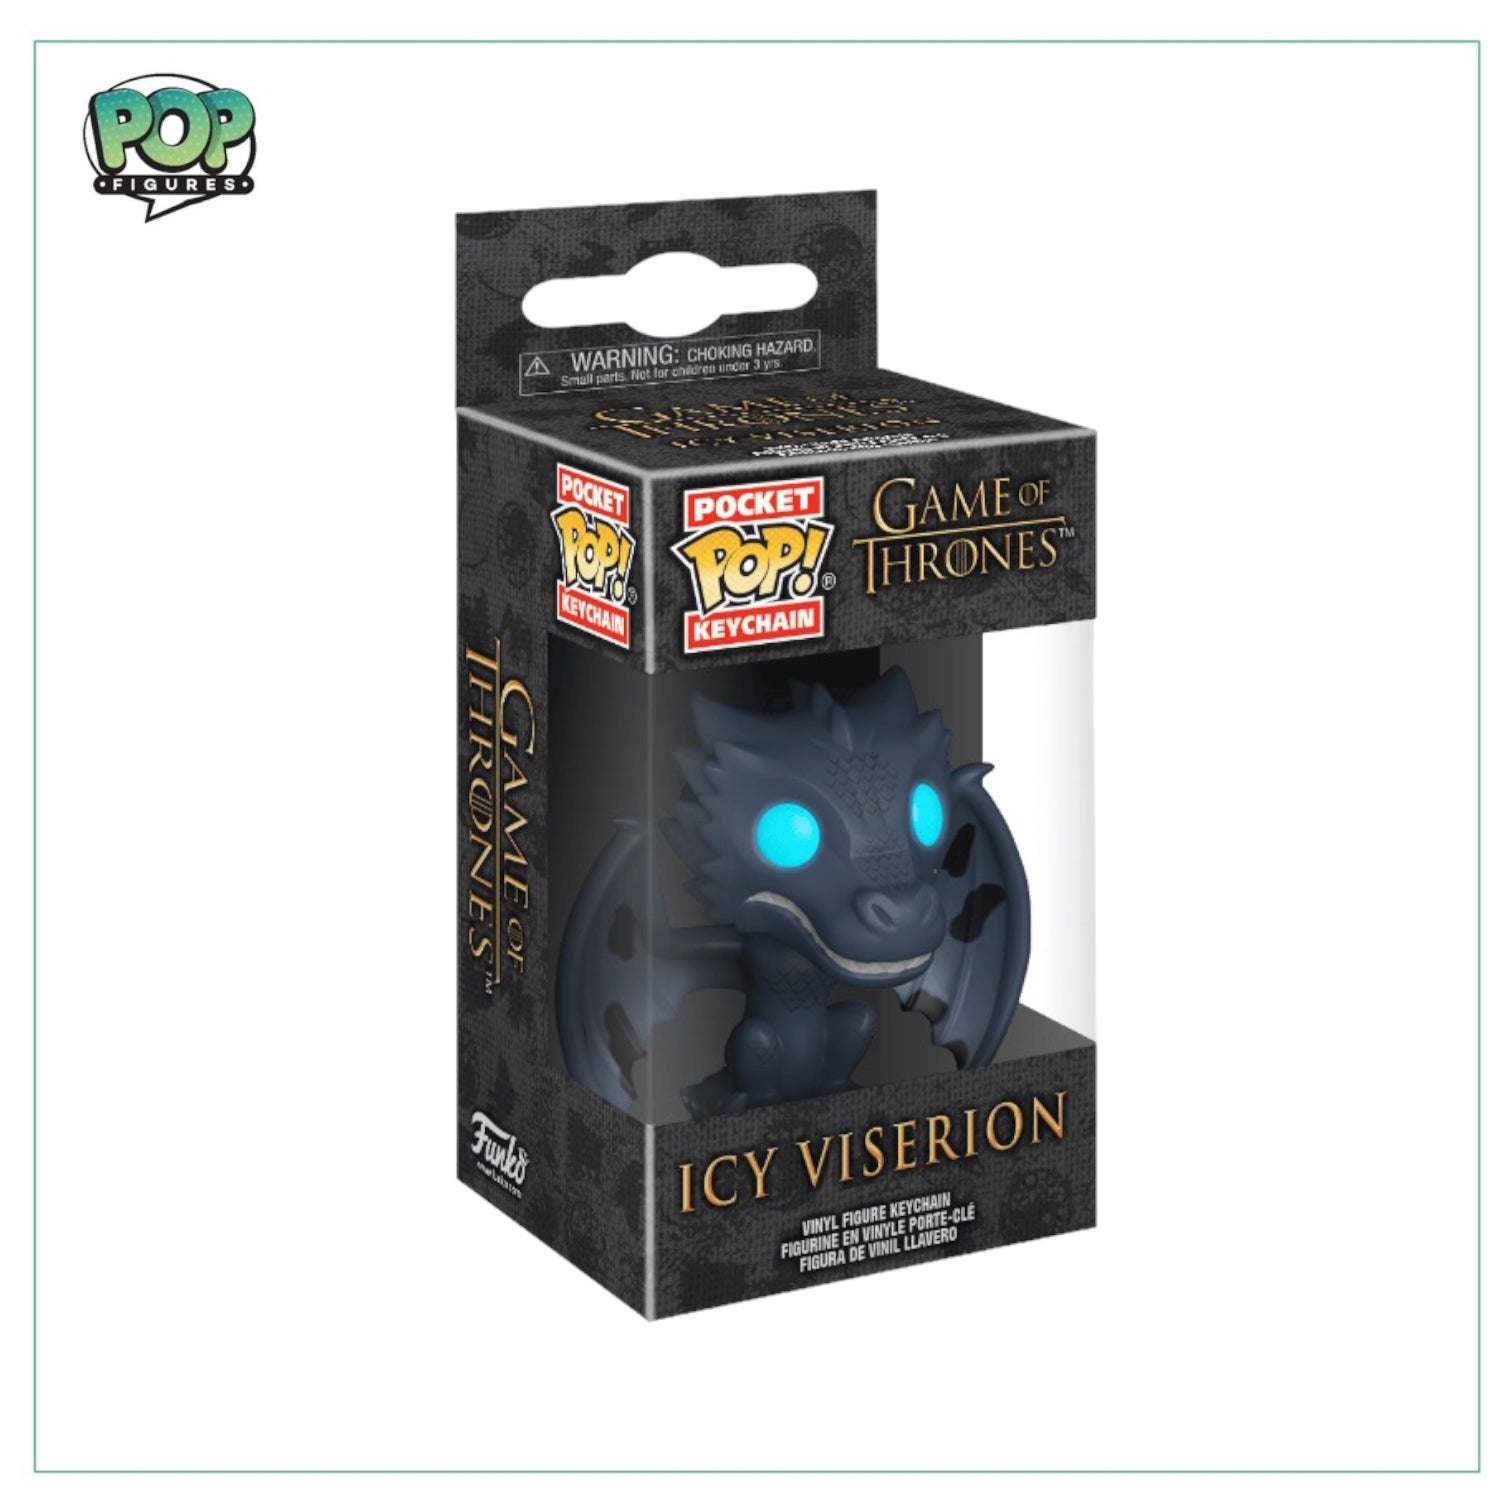 Icy Viserion Pocket Pop Keychain! - Game Of Thrones - Television